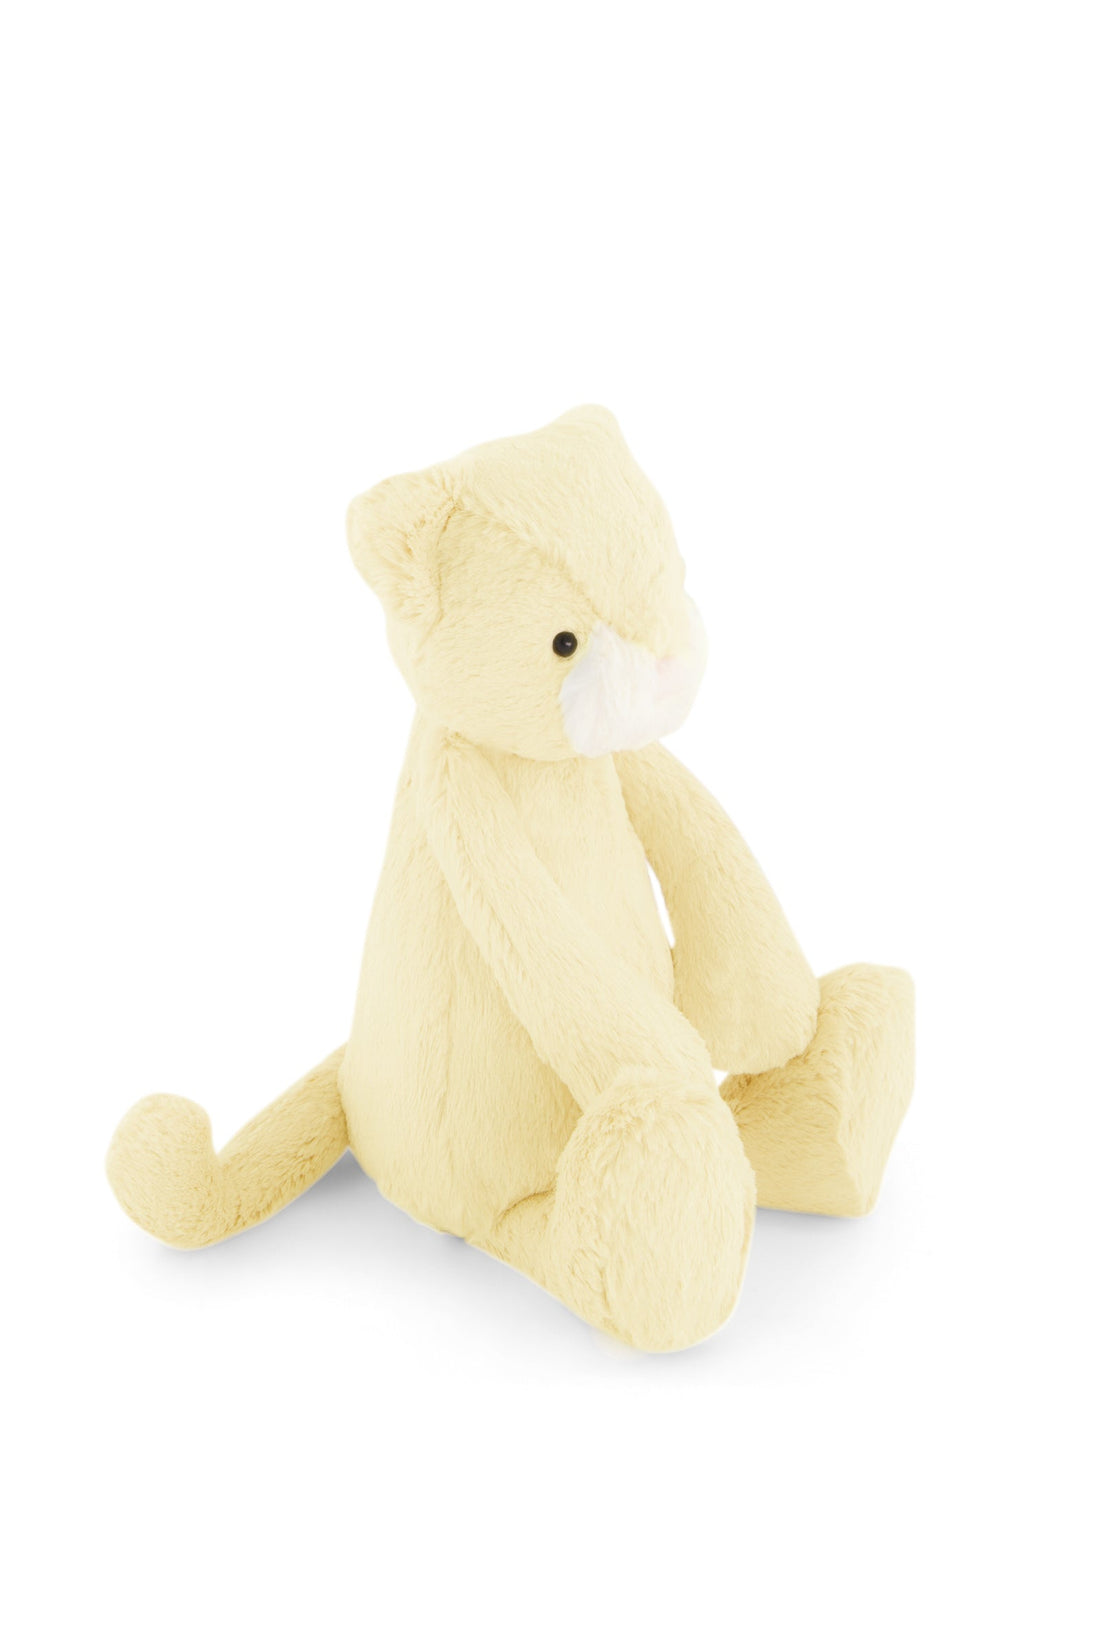 Snuggle Bunnies - Elsie the Kitty - Anise Childrens Toy from Jamie Kay USA